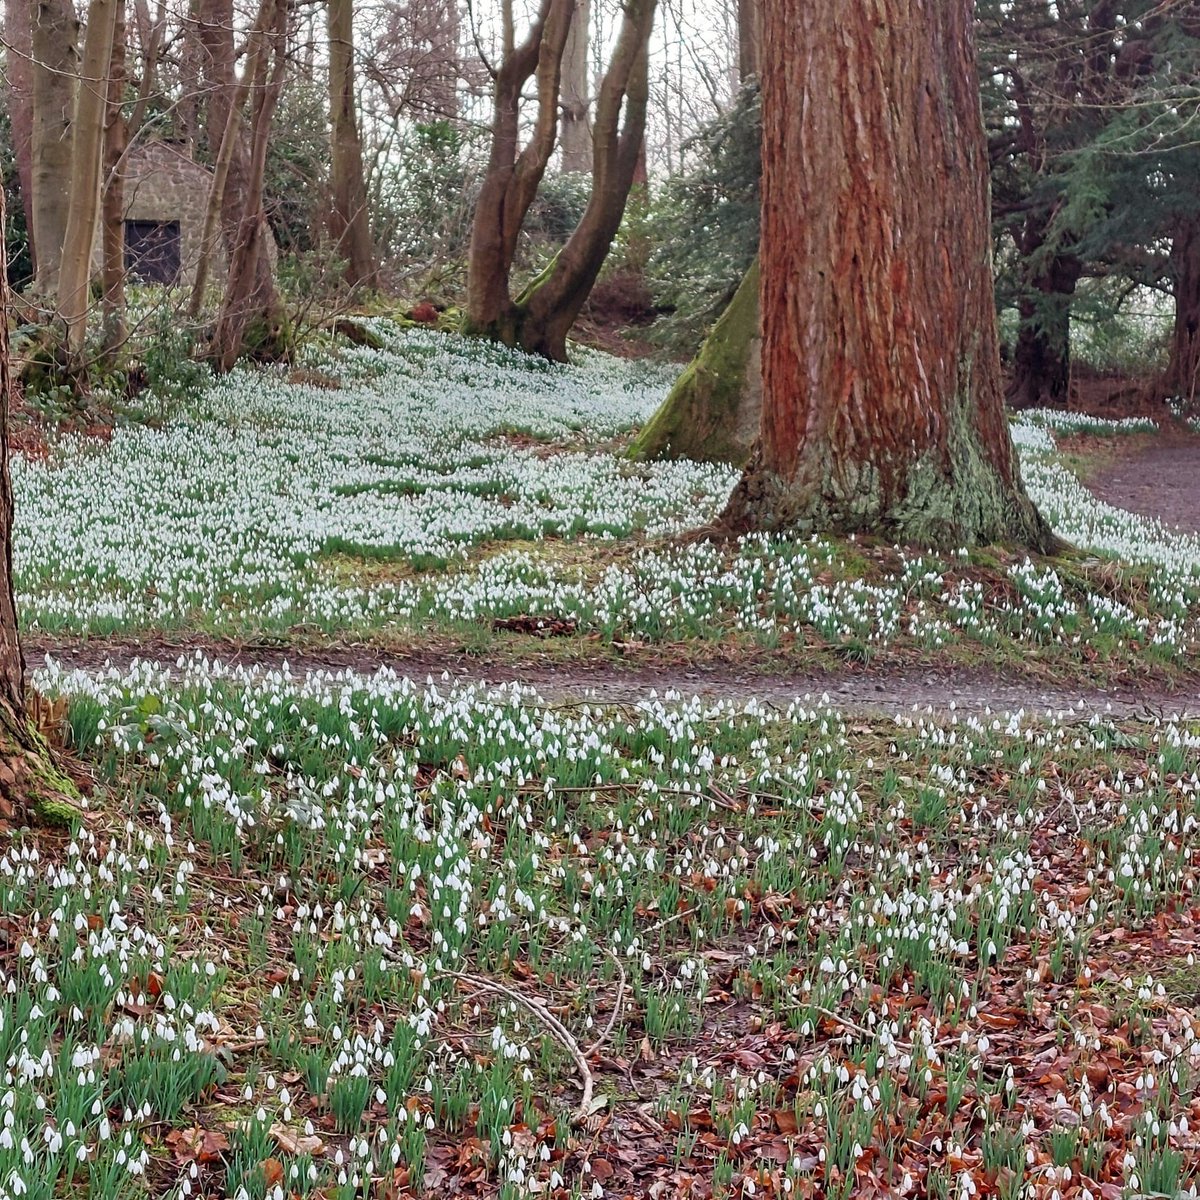 The snowdrop season is well and truly underway at Chirk Castle. Pockets of these beautiful nodding white flowers can be found around the garden, with the most spectacular carpet displays found in the Pleasure Ground Wood. Details here: bit.ly/43i6K0v #ChirkCastle